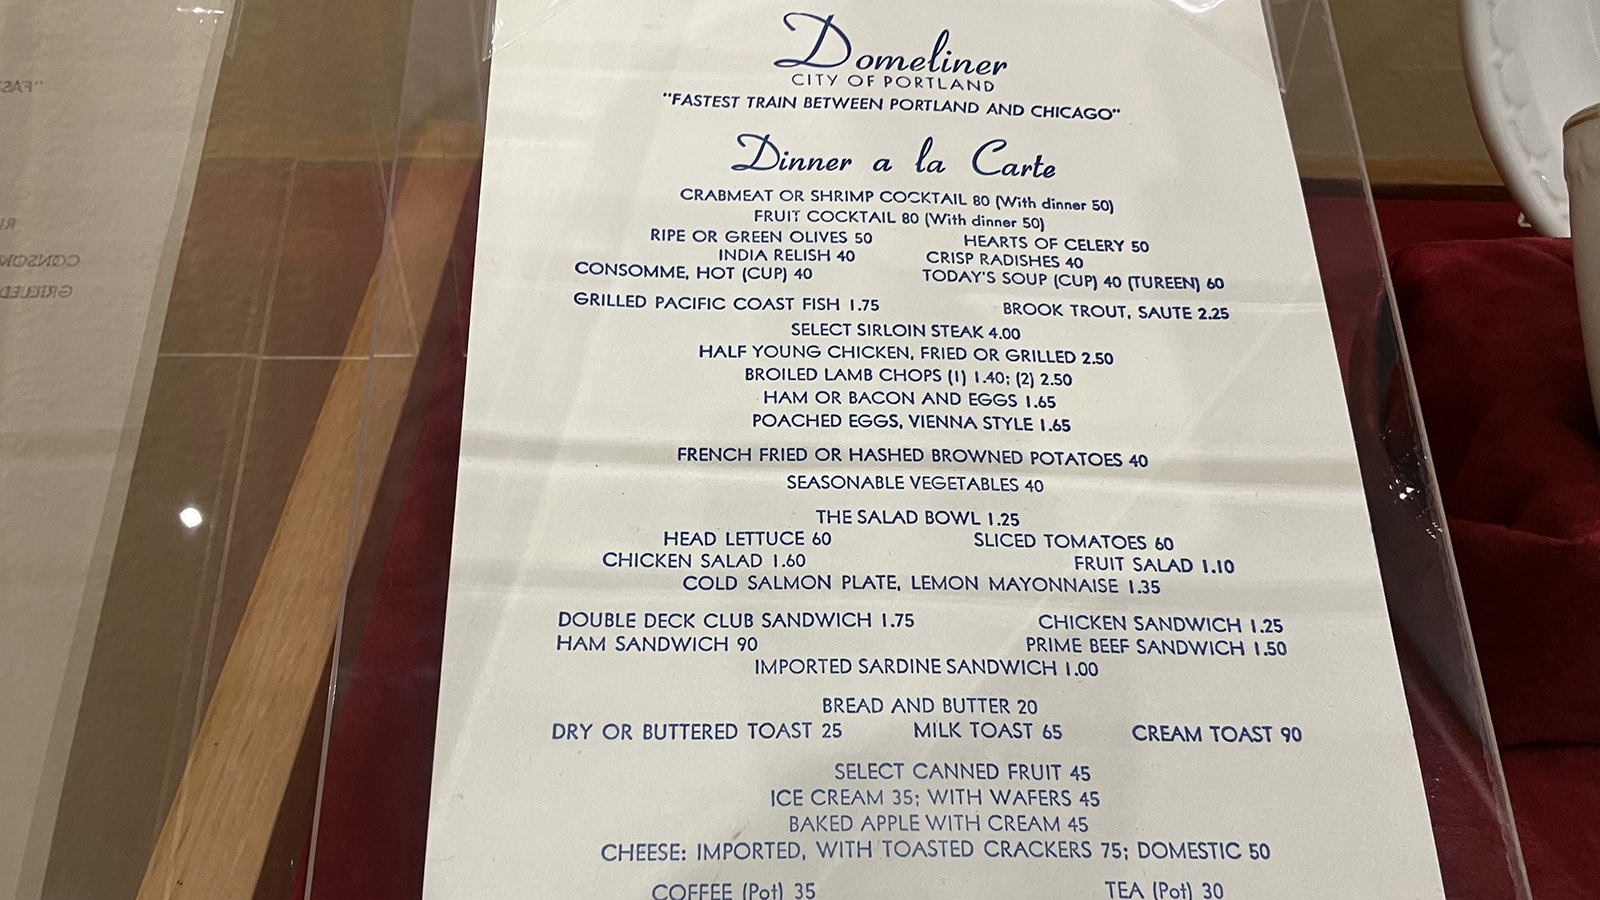 A menu from the “City of Portland” Domeliner train between Portland and Chicago shows how sumptuous dining could be on the railroad.